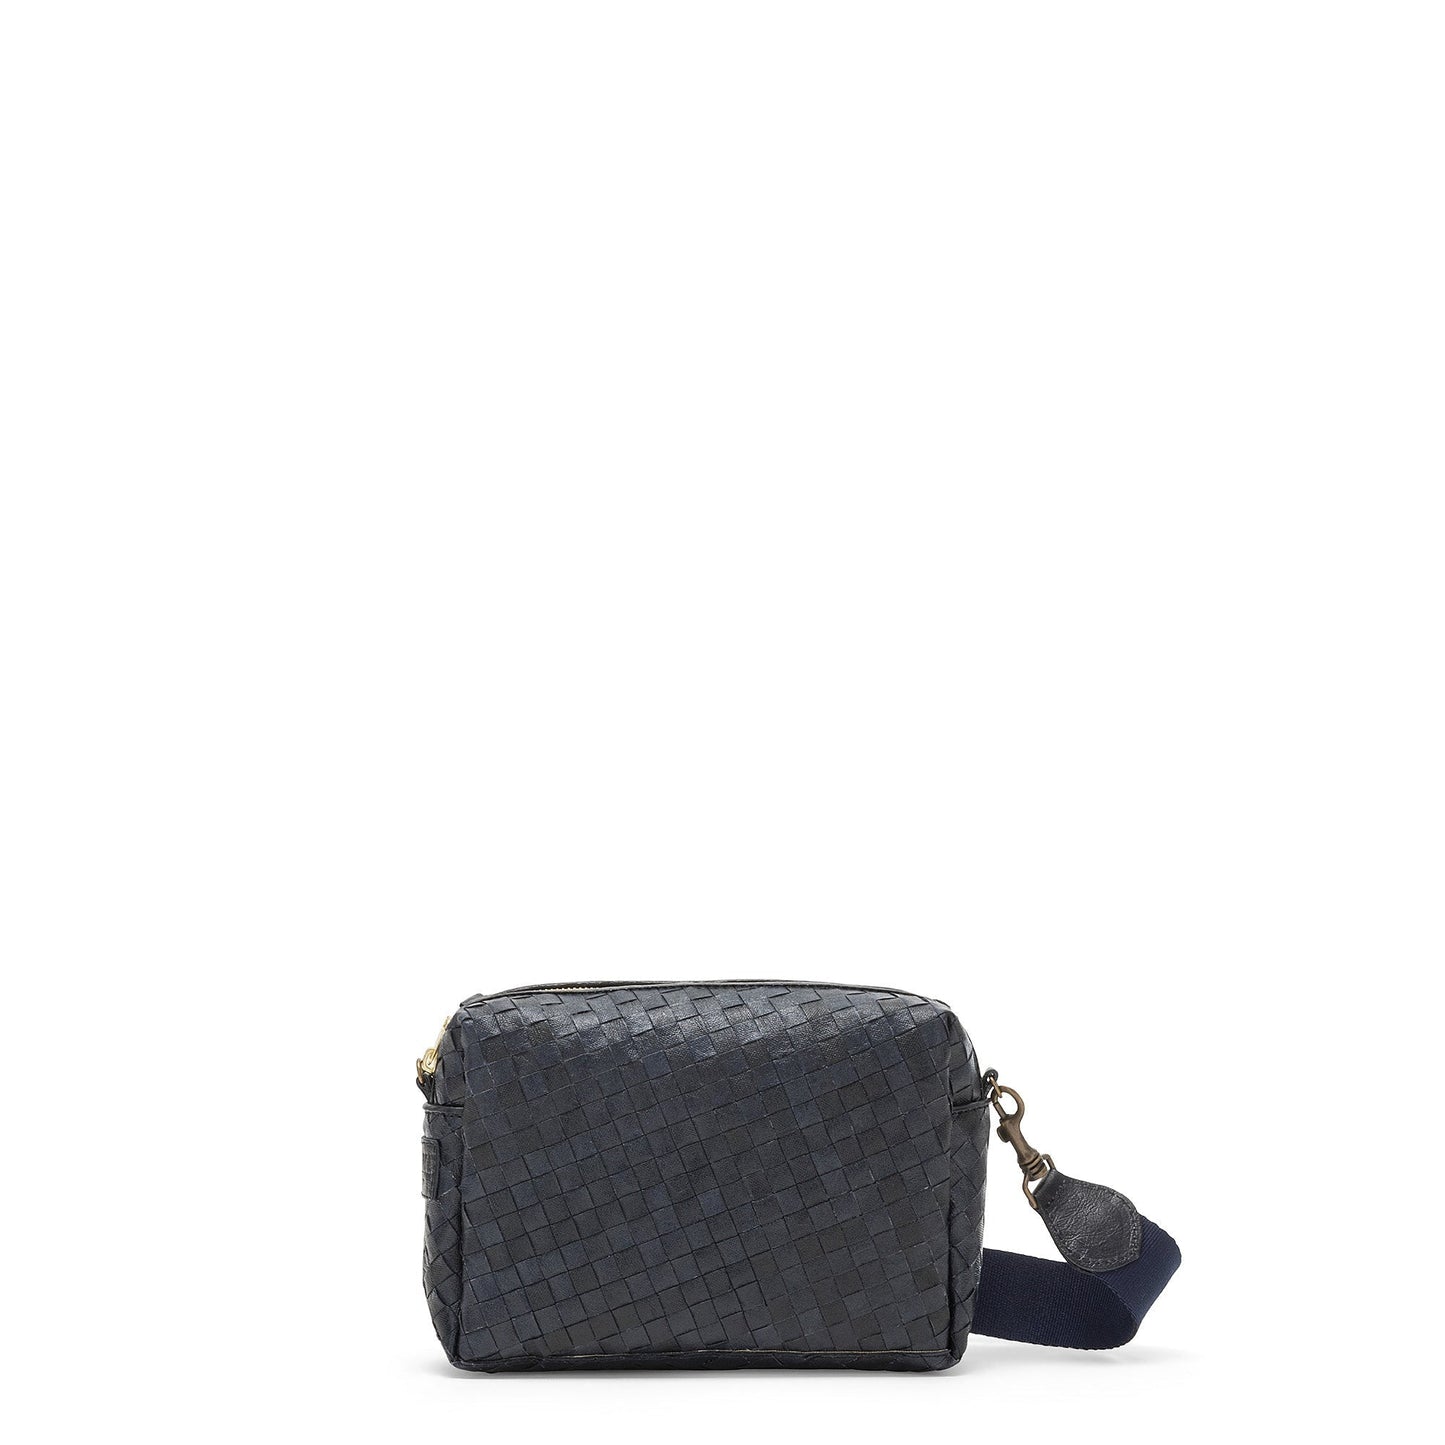 A woven washable paper handbag is shown. The bag is rectangular in shape and has a zip fastening and a wide fabric strap. The bag shown is dark blue.